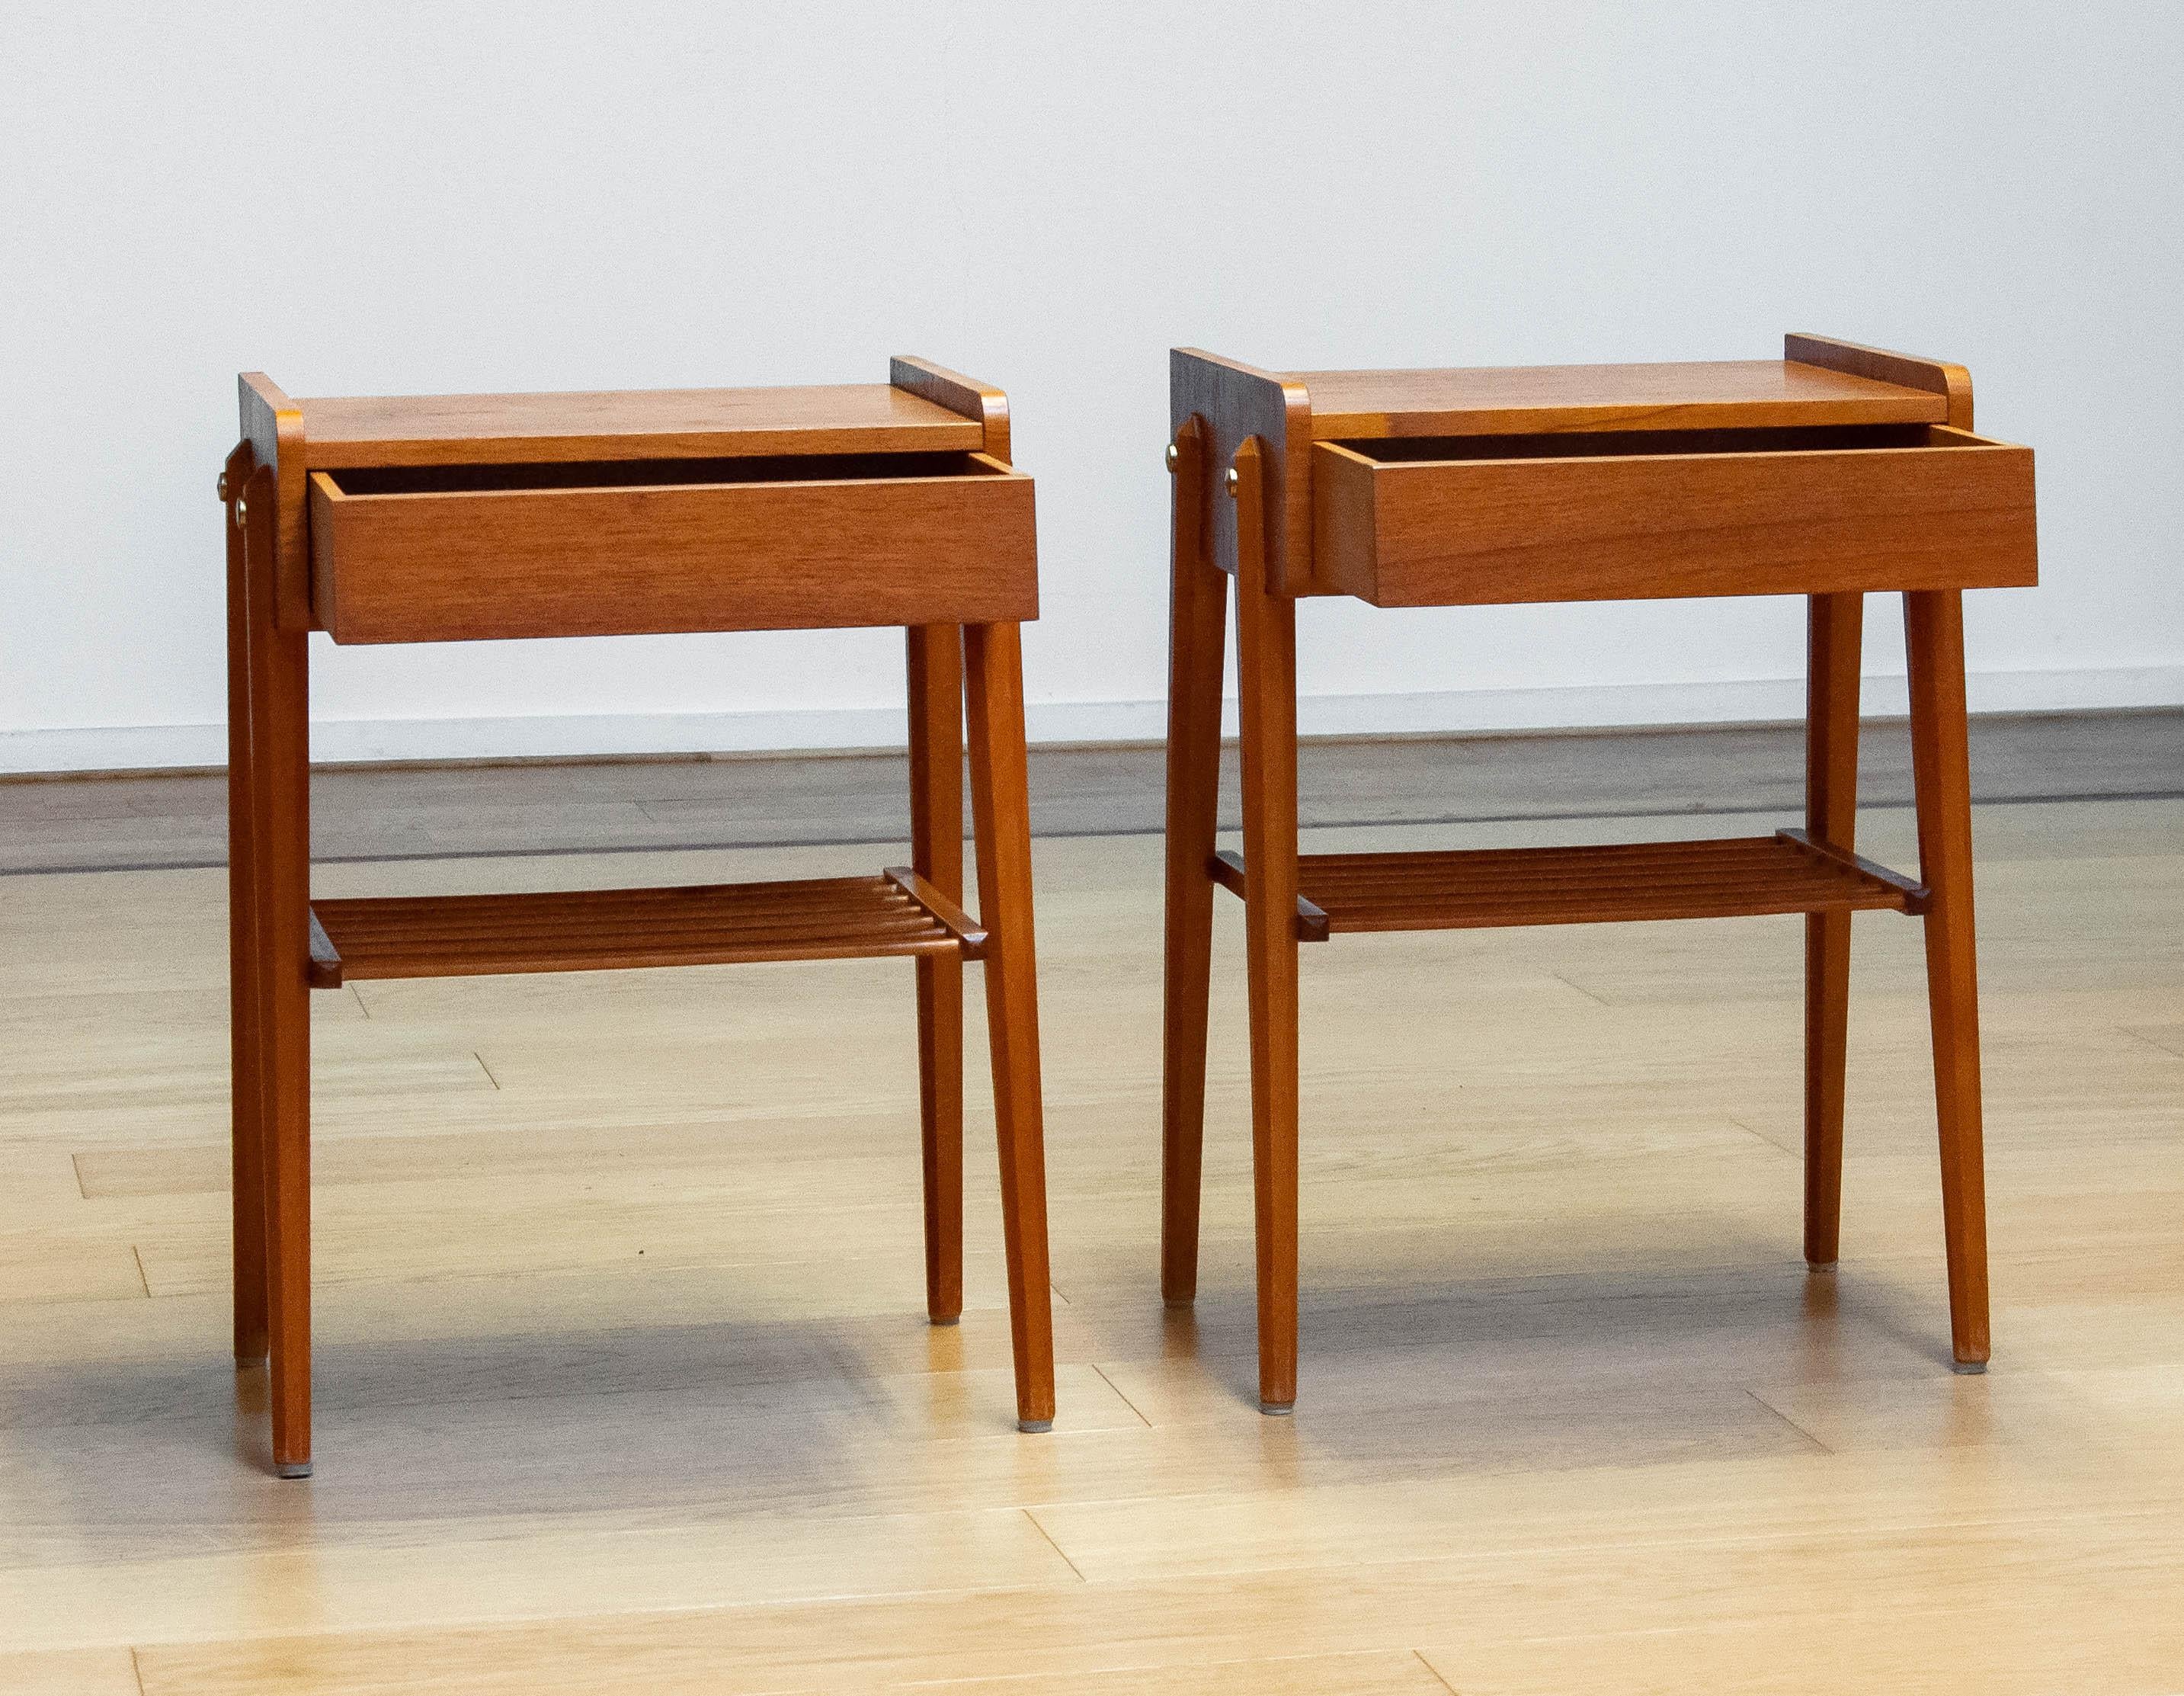 Mid-20th Century 1950s Pair Swedish Night Stands / Bed side Tables By AB Bjärni Made Of Teak